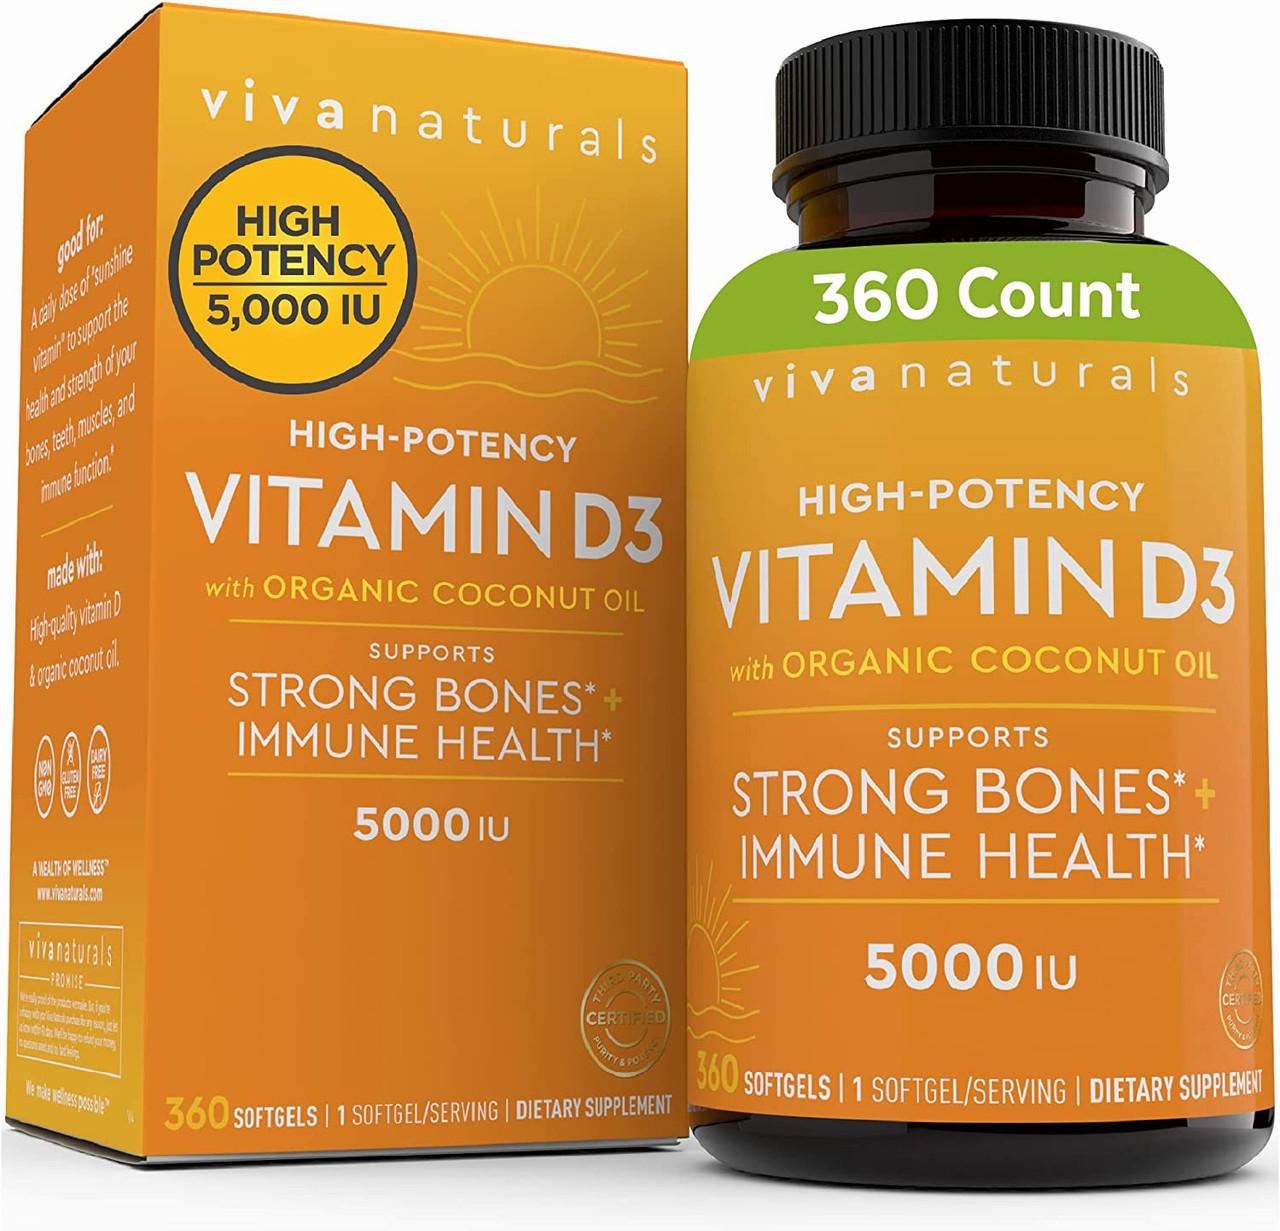 Two bottles of high-potency vitamin D3 with organic coconut oil, which supports strong bones and immune health.